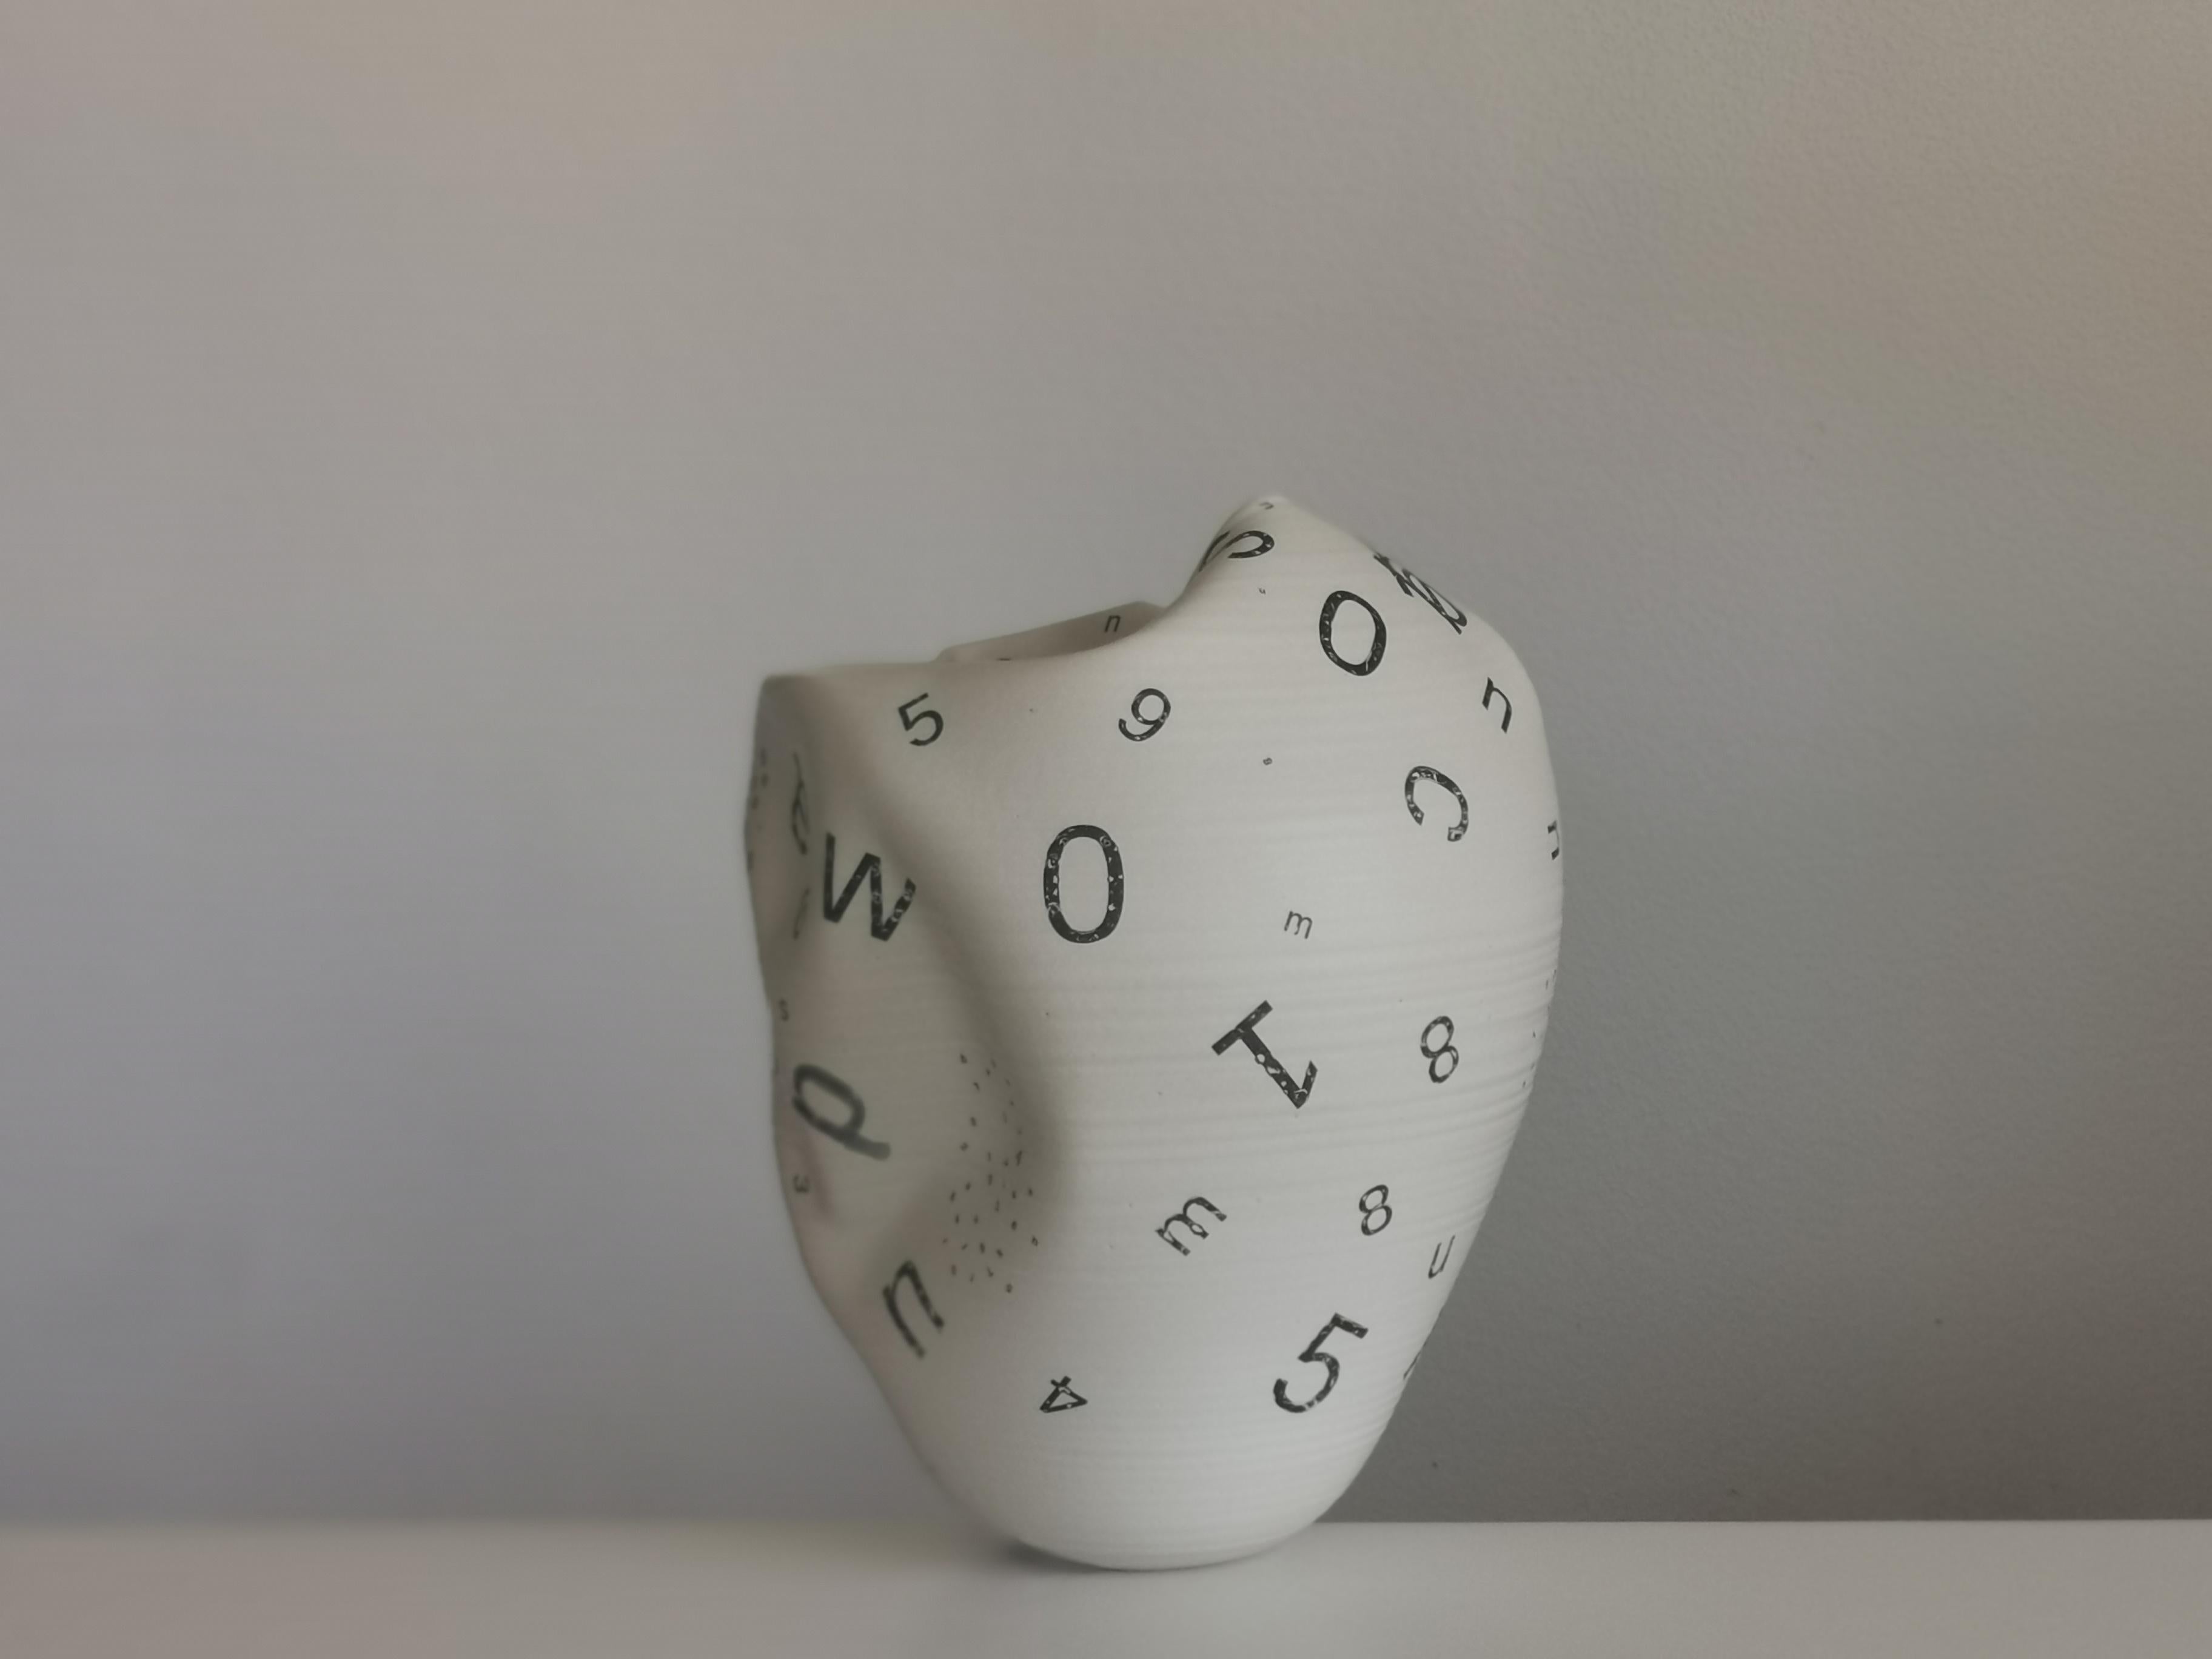 Spanish Distorted Form Letters and Numbers N.82, White Clay Ceramic Sculpture, Vessel For Sale